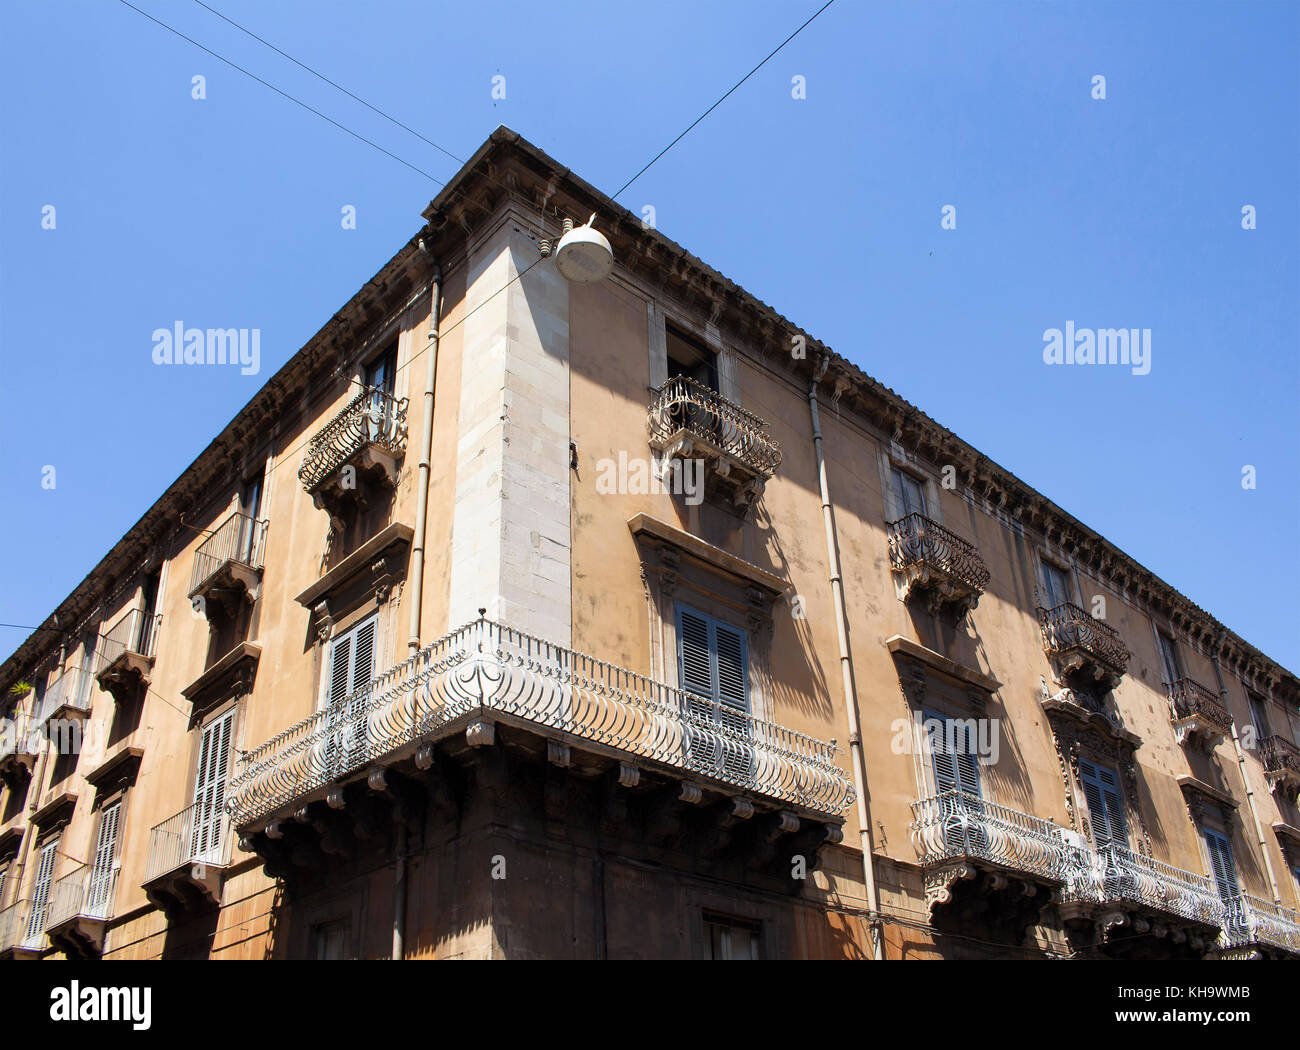 Bottom view of old, historical building in Catania / Italy. Stock Photo